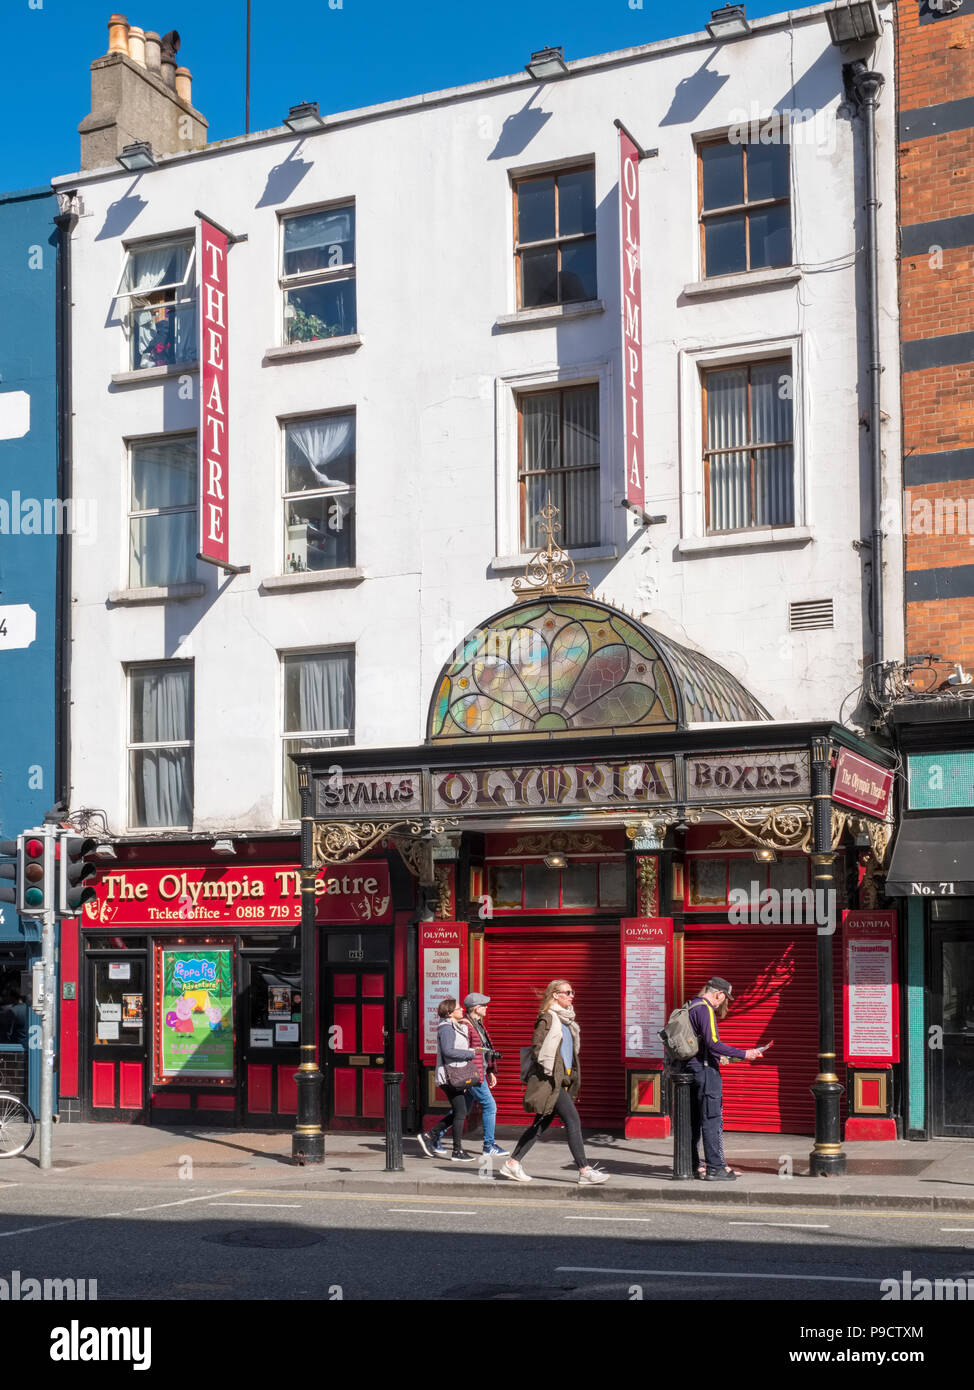 Olympia Theatre, Dublin, Irlande, Europe Banque D'Images